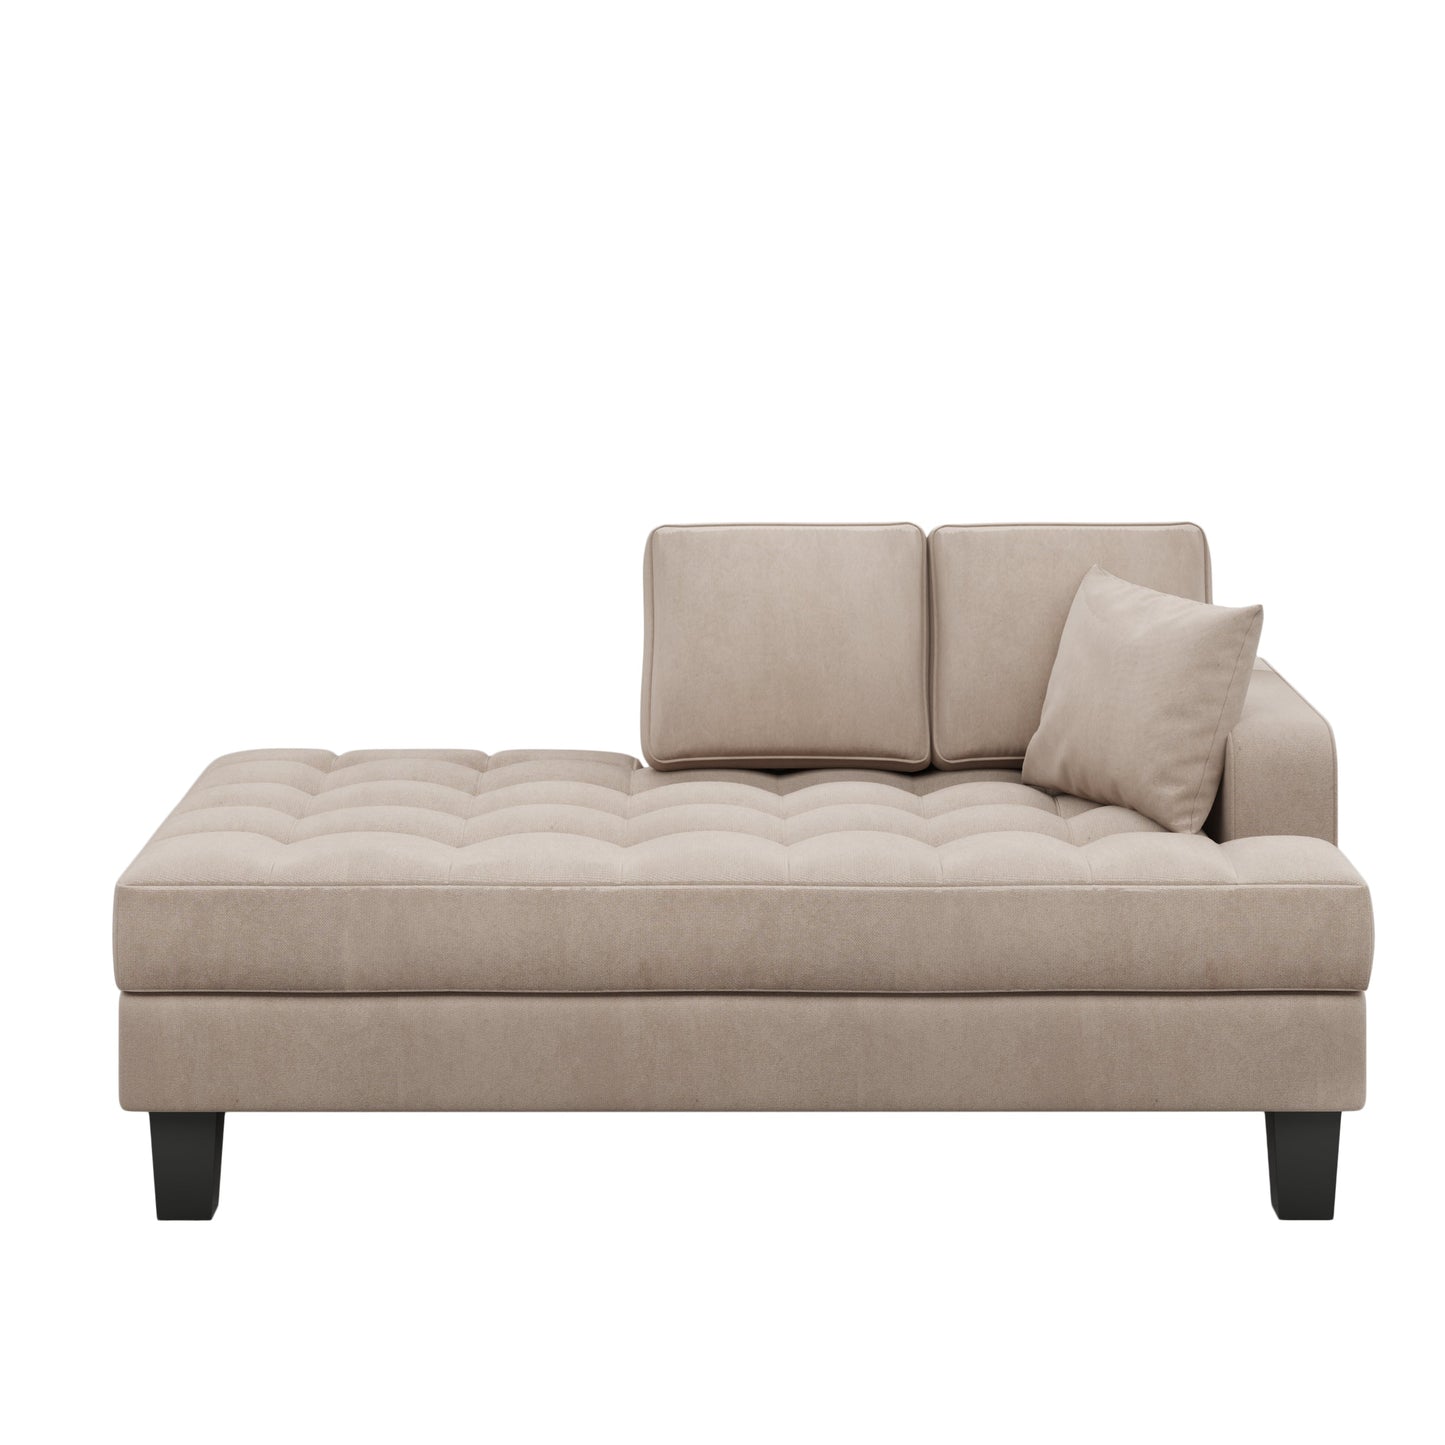 Galina Deep Tufted Upholstered Textured Fabric Chaise Lounge with Toss Pillow, Warm Grey